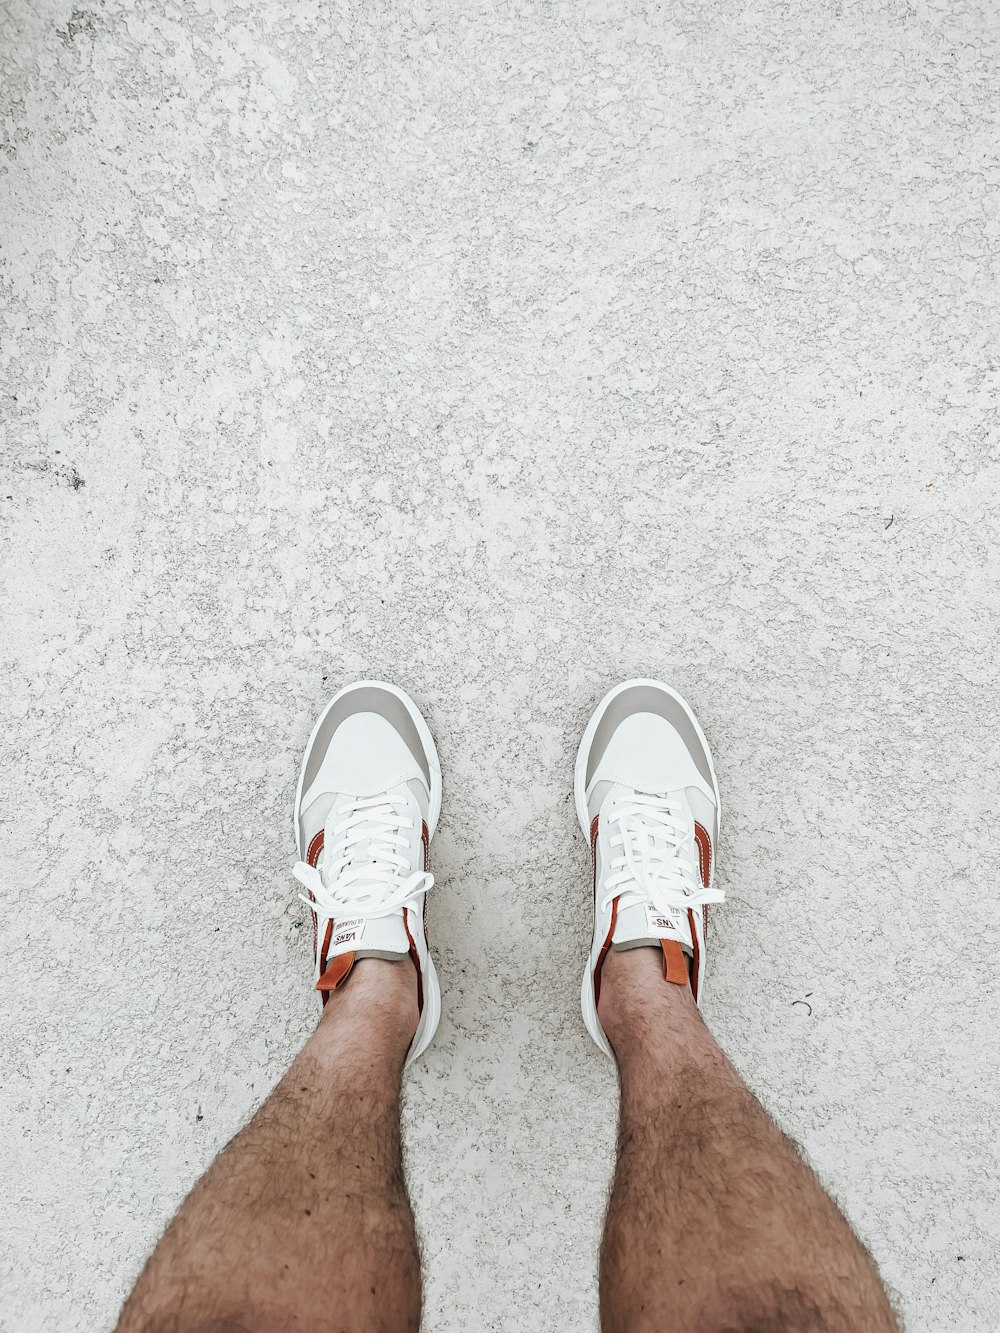 a person's legs with white shoes on